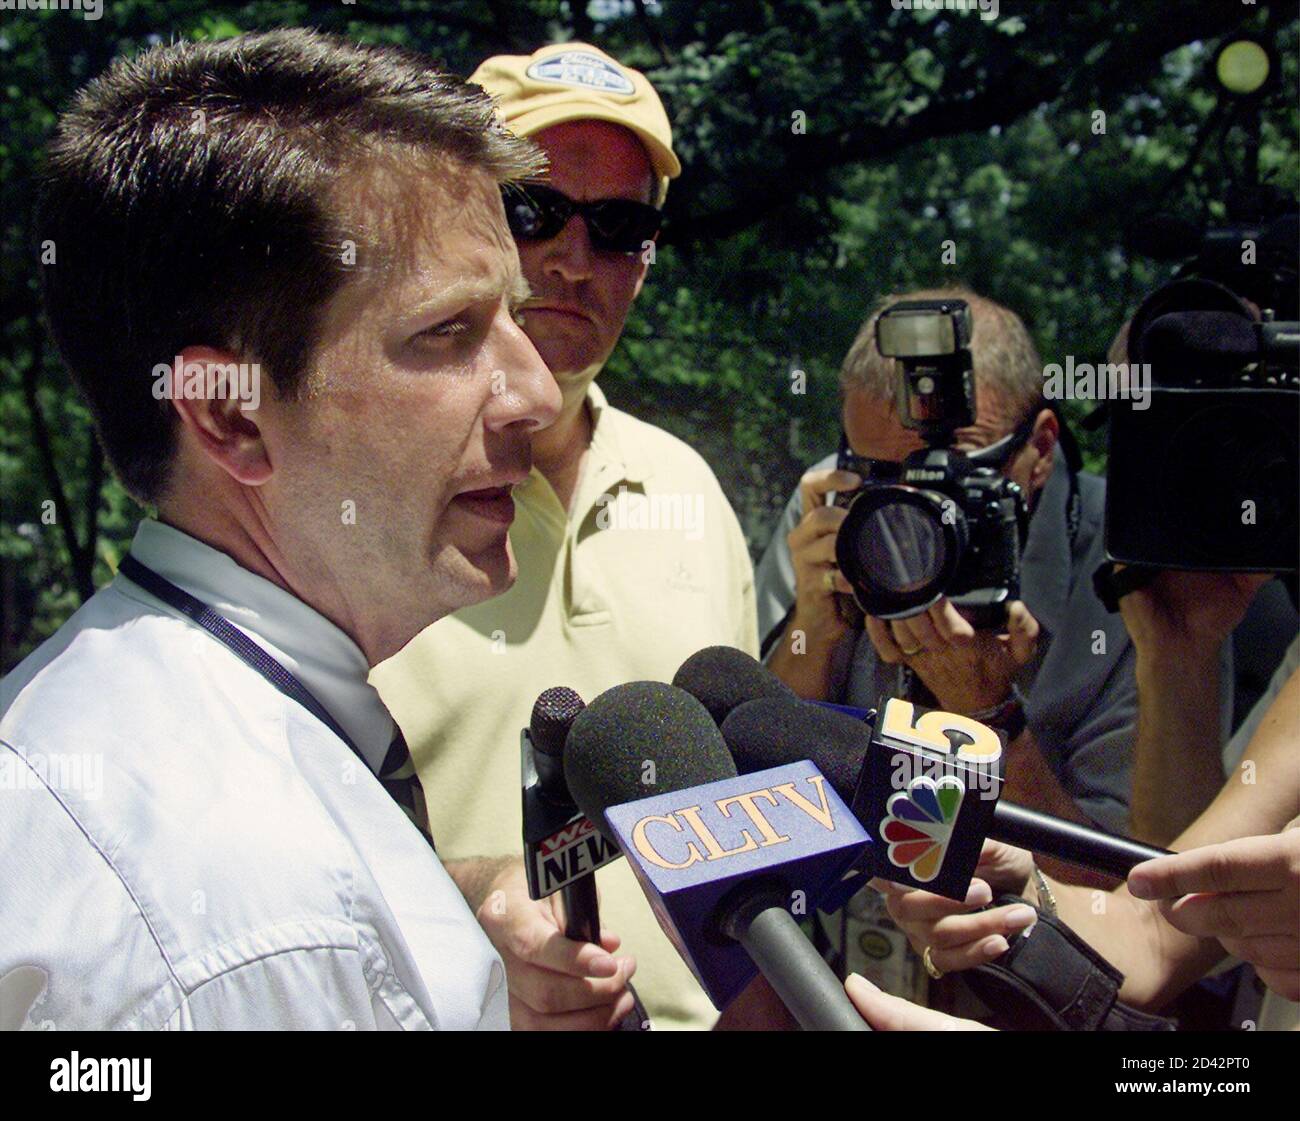 John Kaczkowski, Western Golf Association tournament director, speaks with the media at Cog Hill Golf and Country Club in the Chicago suburb of Lemont, Illinois, July 2, 2002, concerning the withdrawal of Tiger Woods from the 2002 Advil Western Open. The Advil Western Open begins here July 4. REUTERS/Sue Ogrocki  SUE Stock Photo